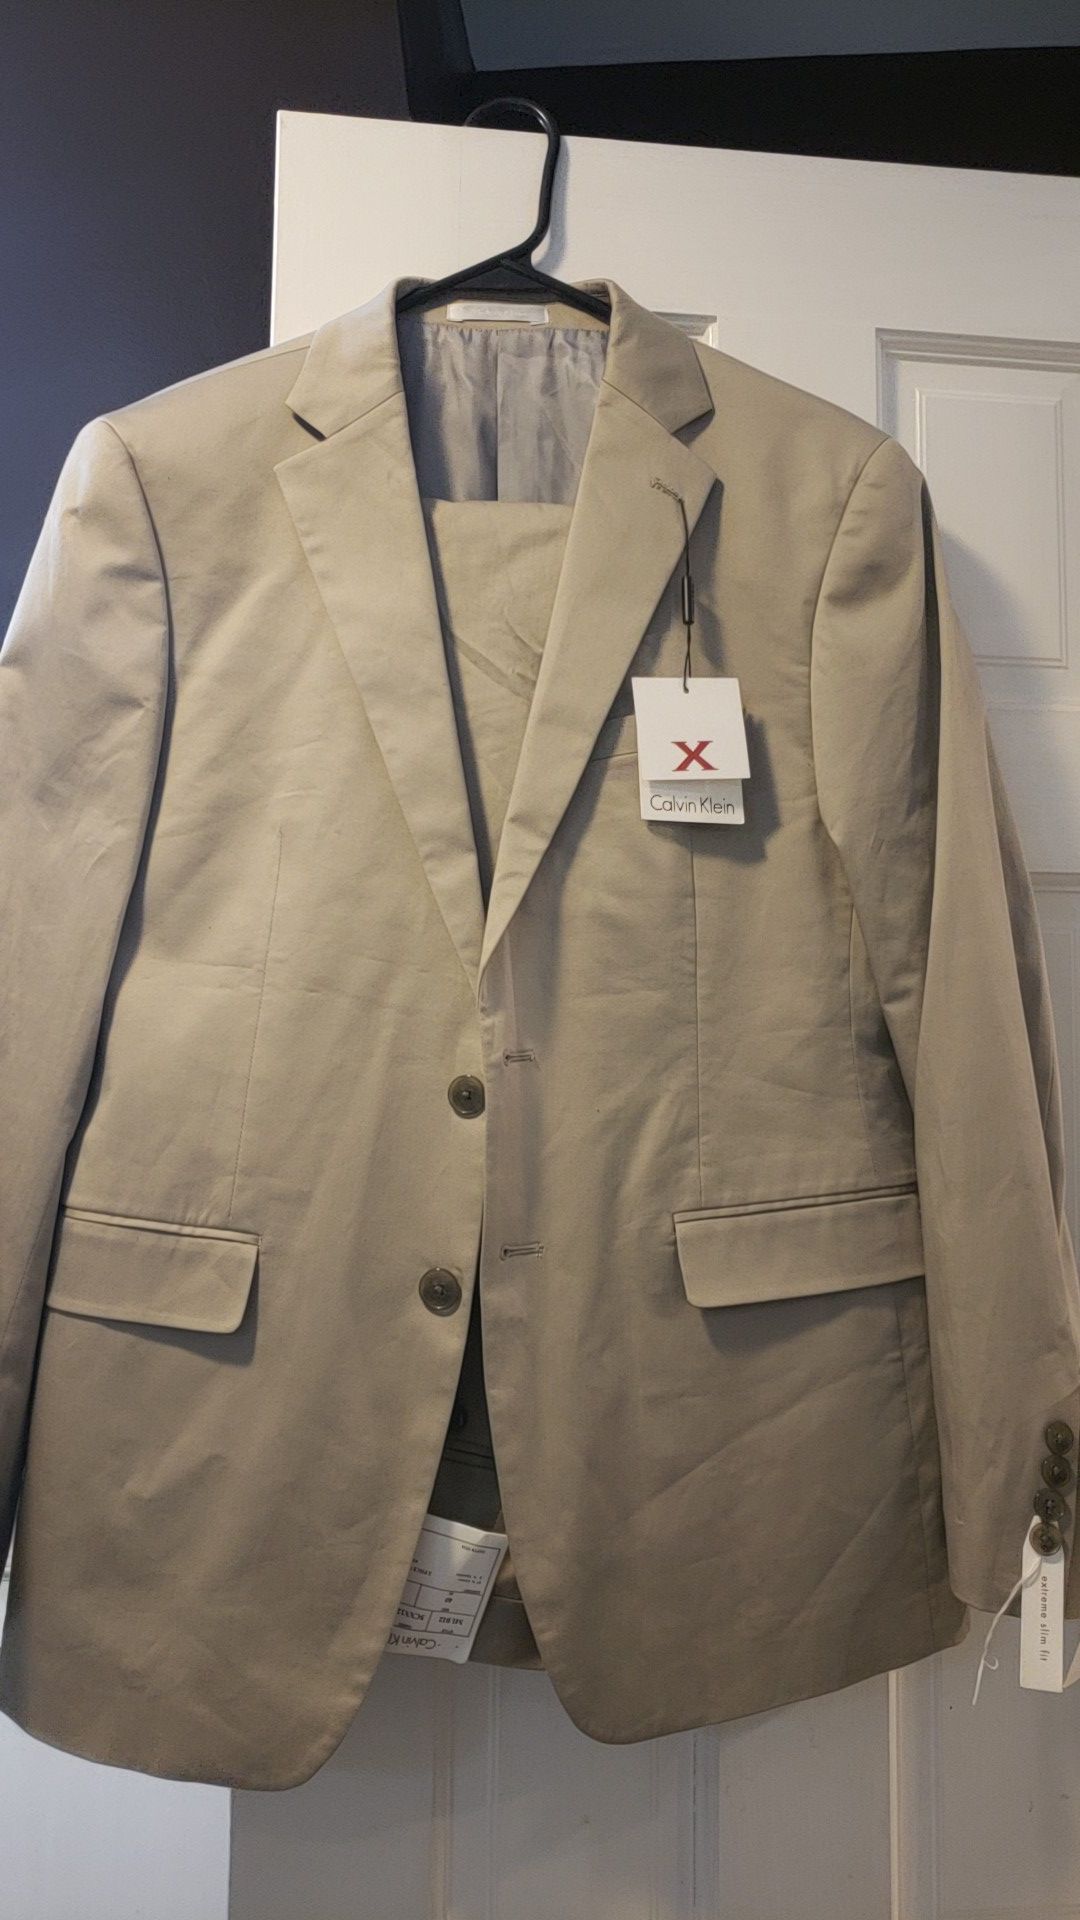 Brand new with tags Calvin Klein Macy's mens store suit 40s 33 waist khaki